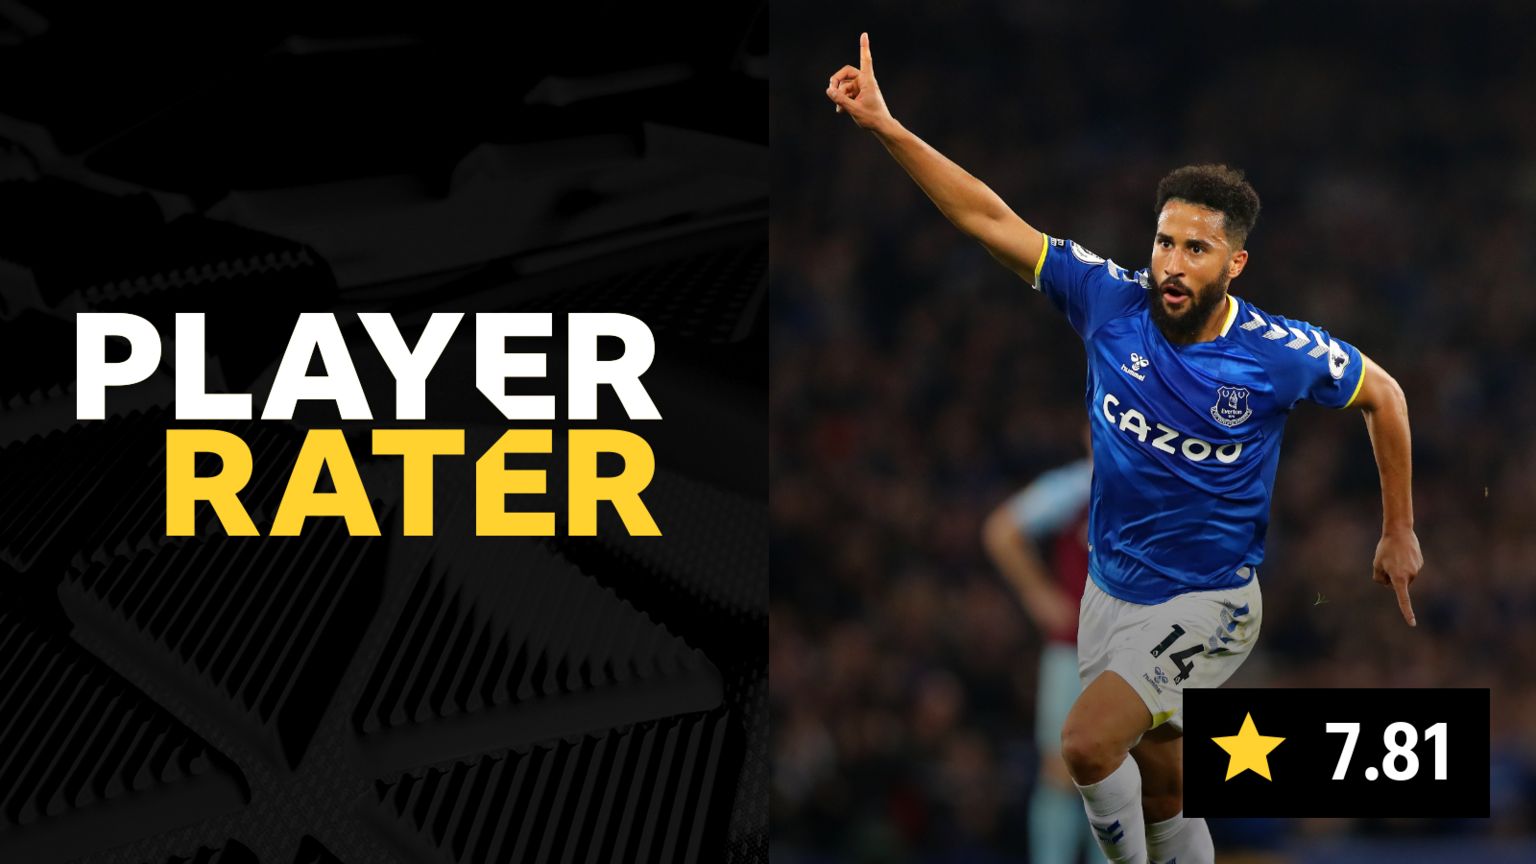 Player rater - Andros Townsend scored 7.81